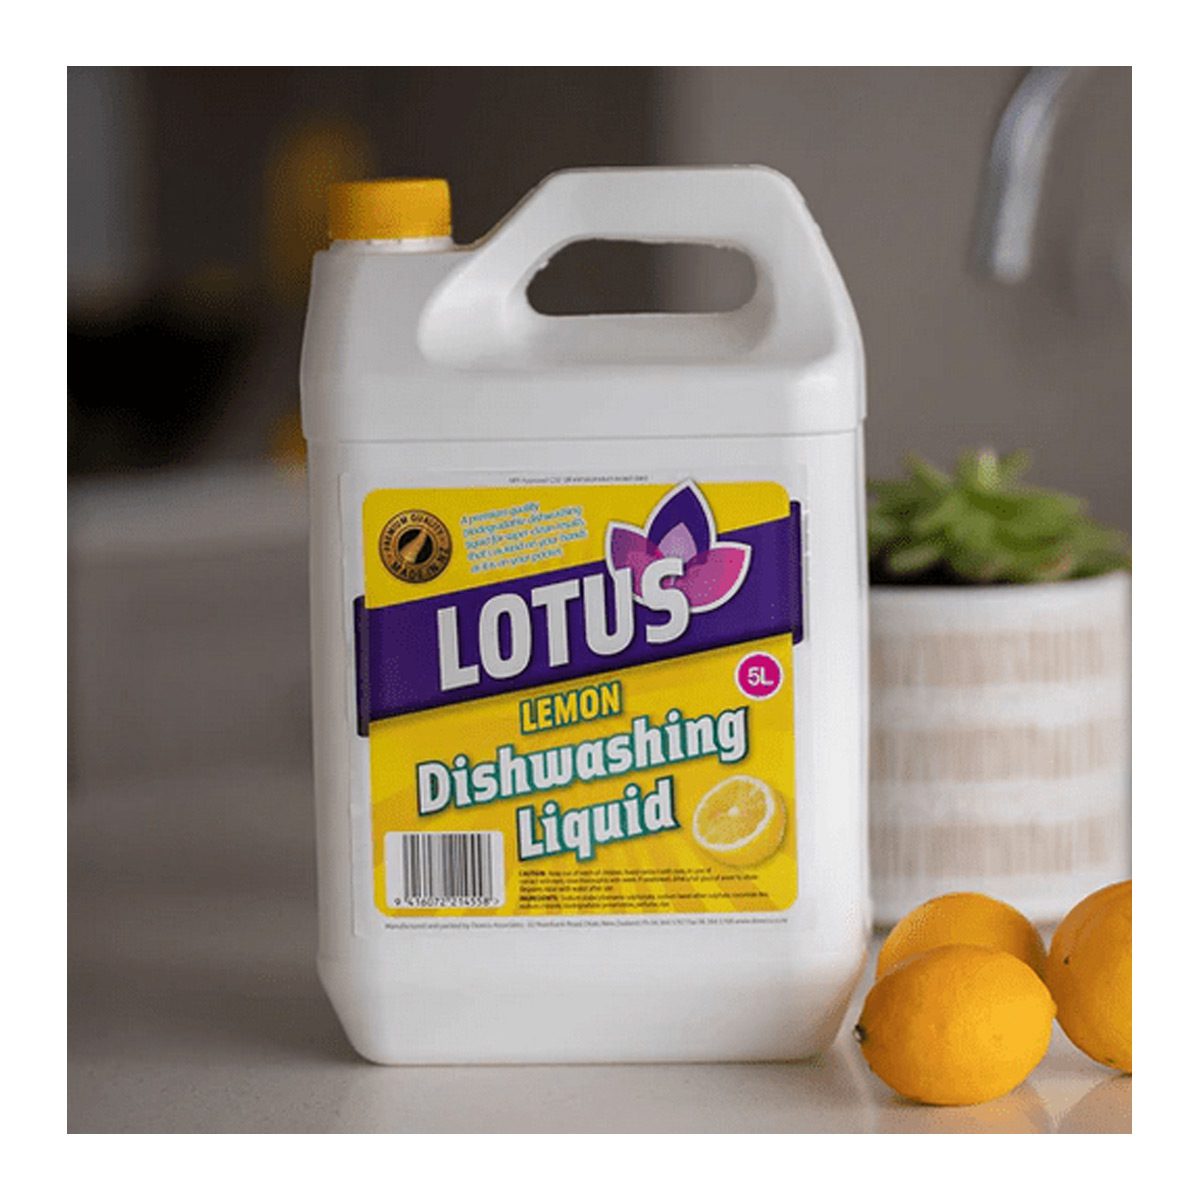 cleaning-products-kitchen-multipurpose-lotus-lemon-dishwash-liquid-5L-litre-lotus-lemon-dishwash-5-litres-also-available-in-lime-vjs-distributors-LL5